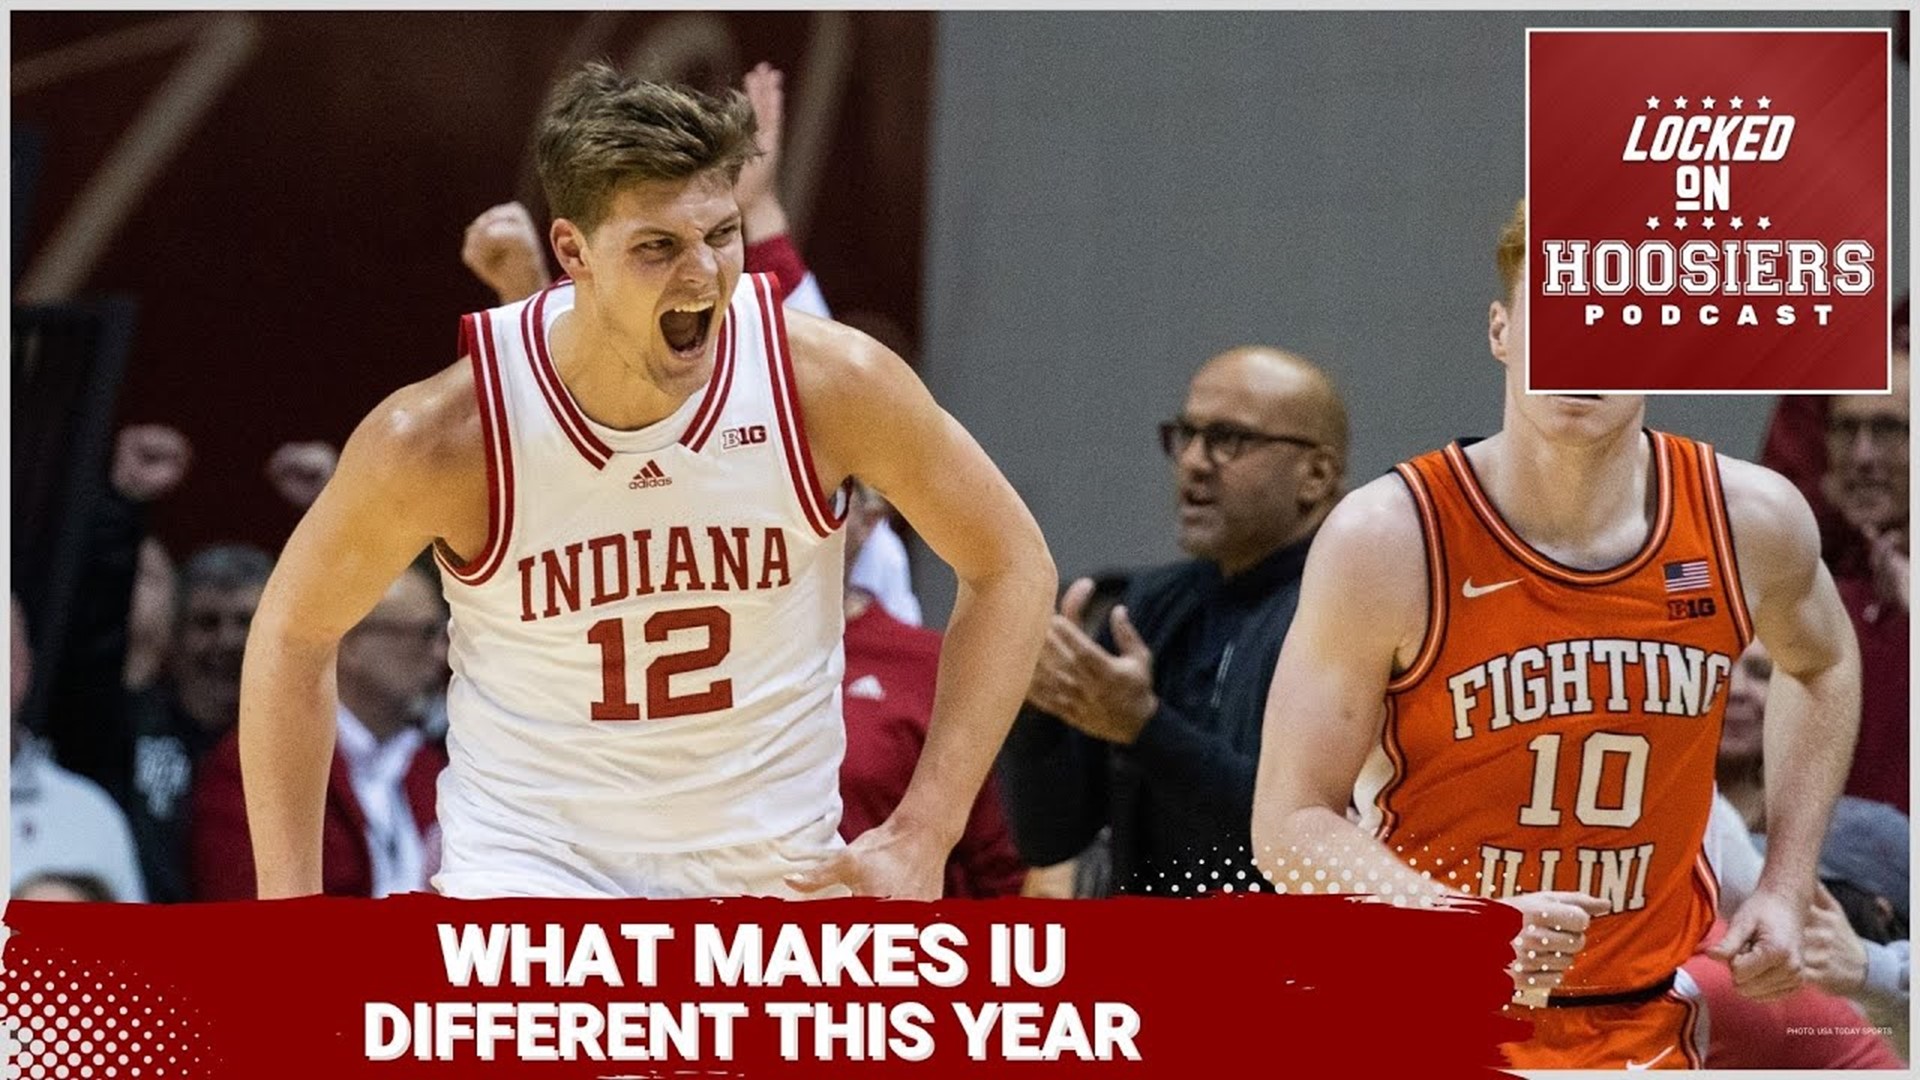 Why this Indiana Hoosiers team is different from previous years